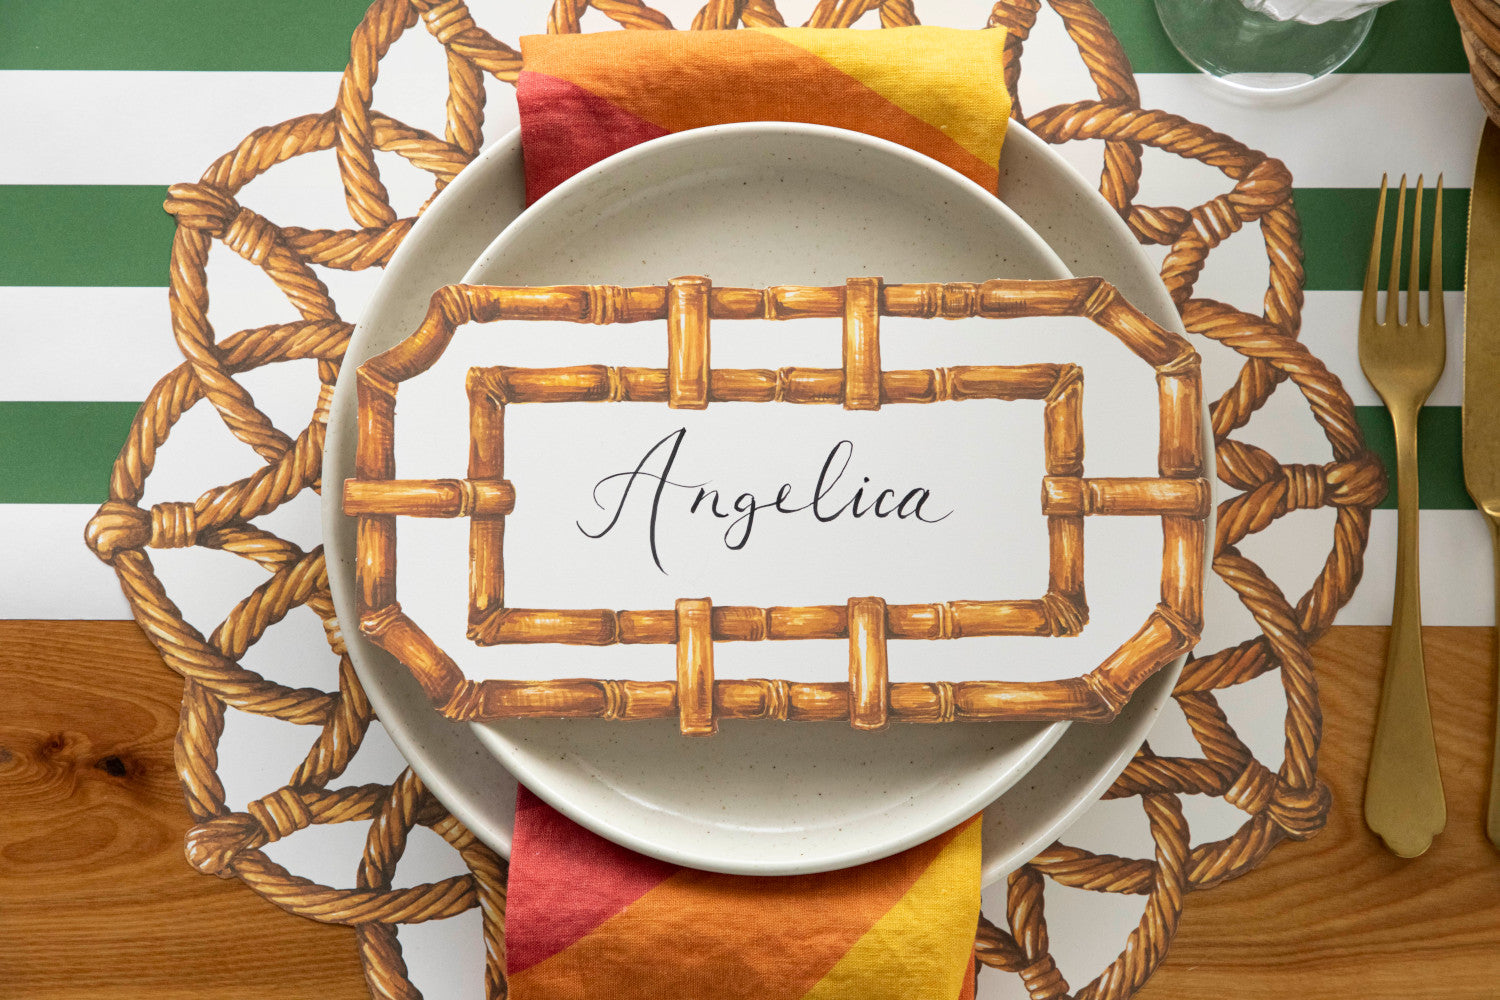 A Die-cut Rattan Weave Placemat with a Hester &amp; Cook name tag on it.